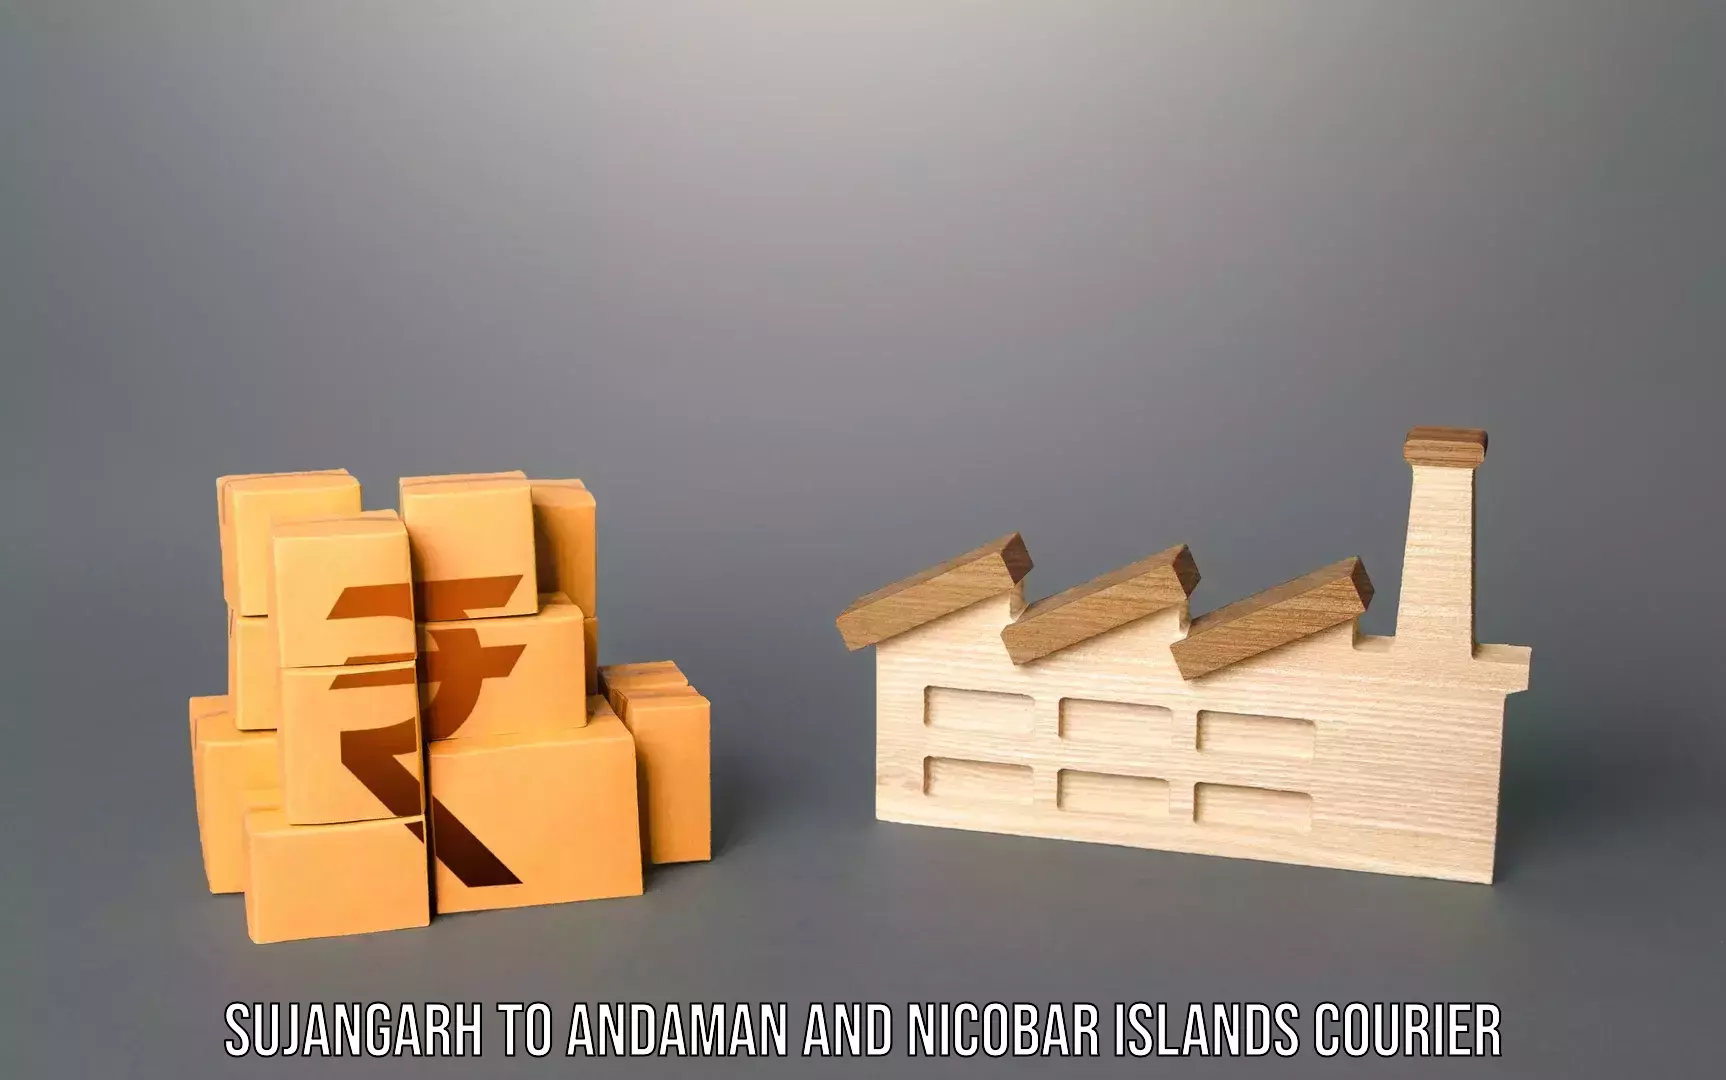 Luggage transport guidelines in Sujangarh to Andaman and Nicobar Islands